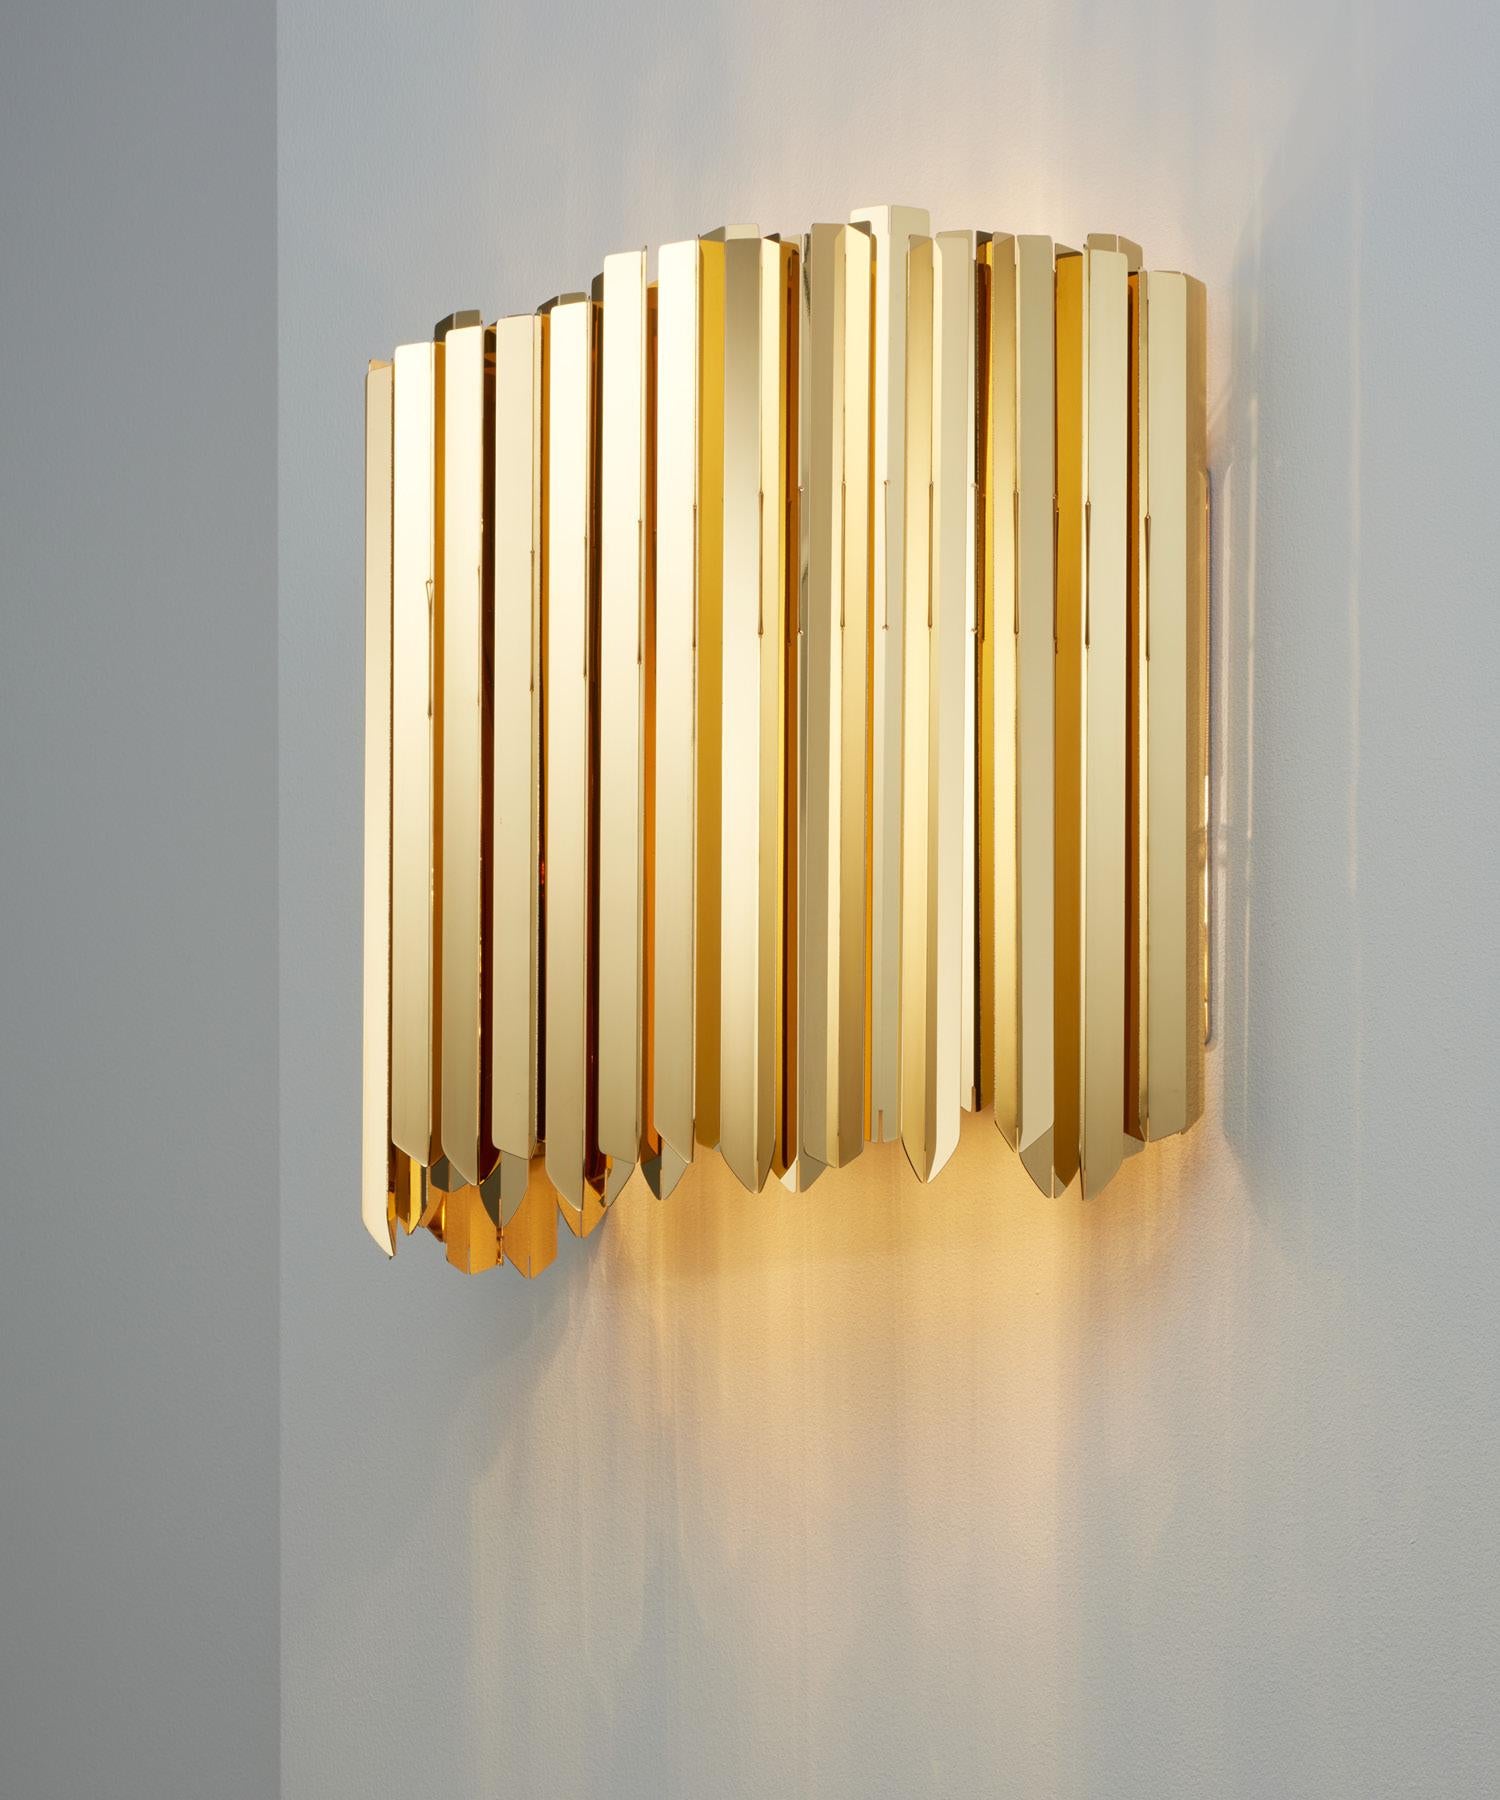 In keeping with the rest of our range, the Facet Wall Light is a unique design. Providing both up and down light, it creates a special ambience- adding a distinct richness to your interior. The luxurious metal finish is available in polished